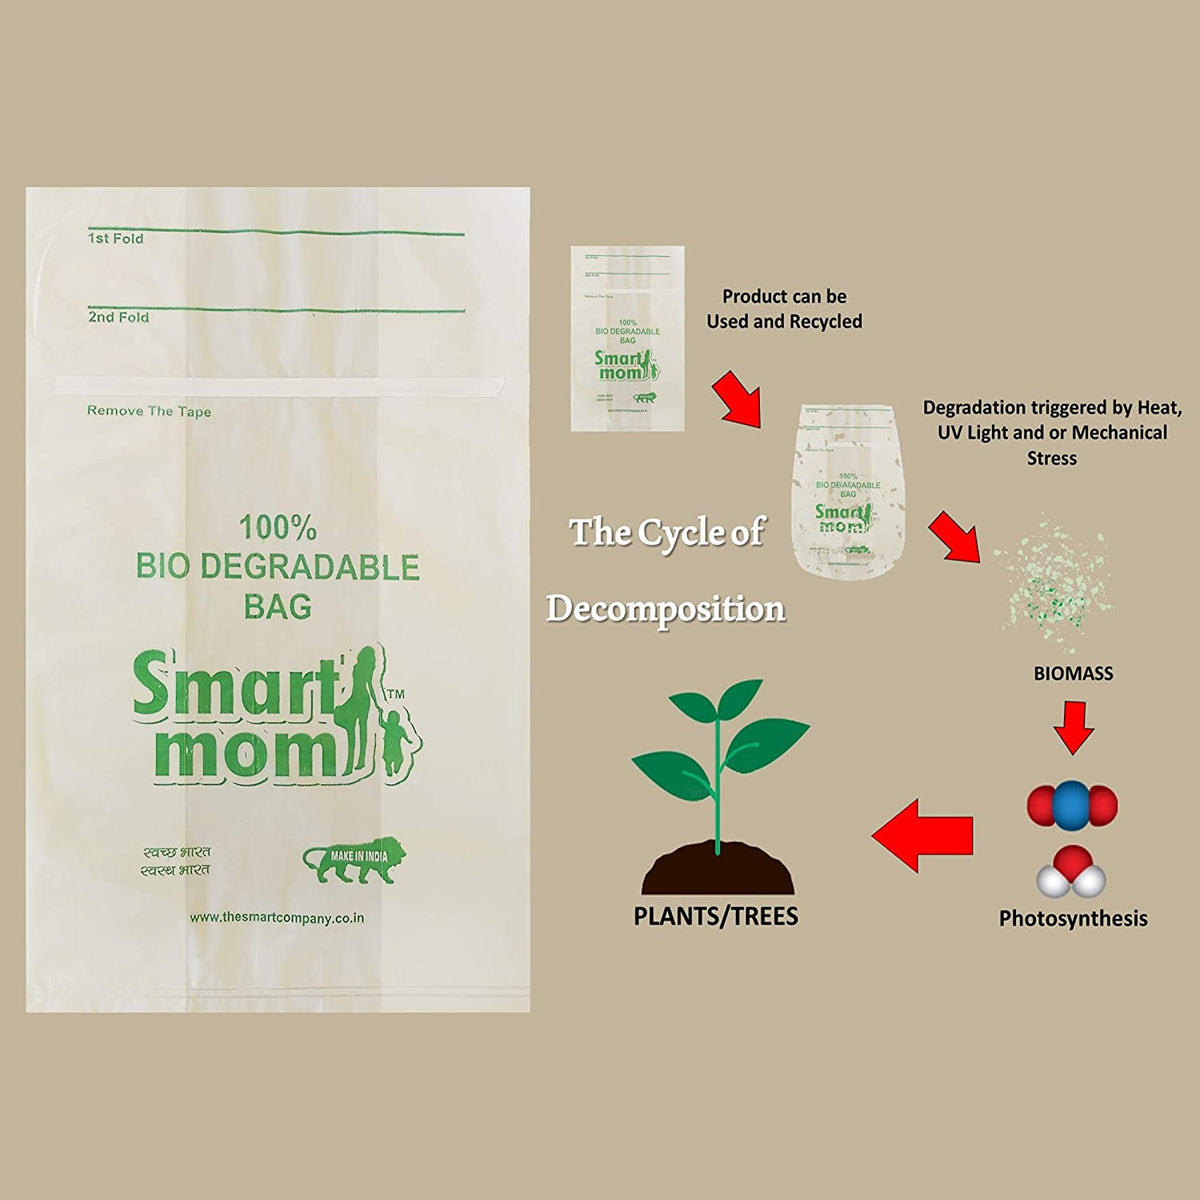 Smart mom Scented, Bio-degradable and ECO Friendly Disposable Bags. LifeKrafts